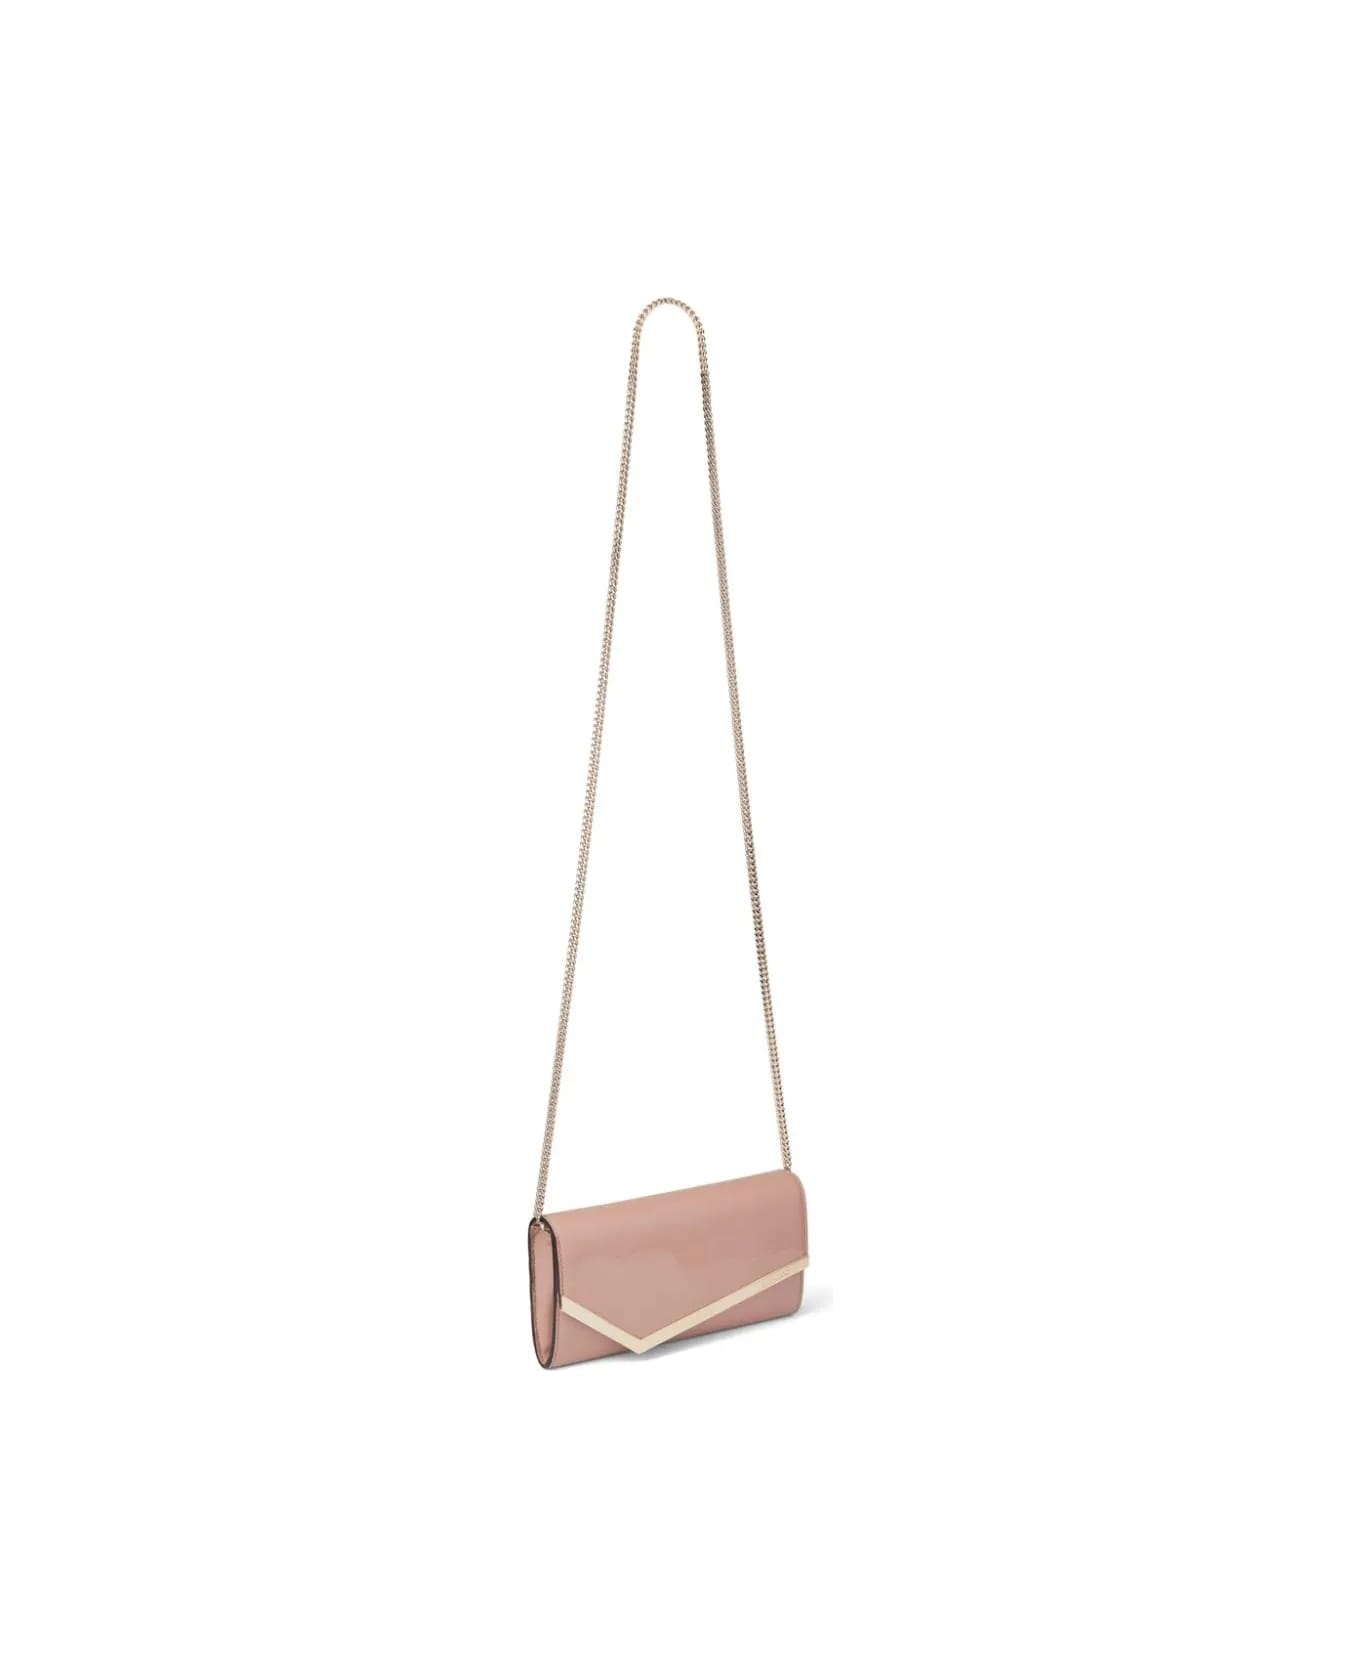 Jimmy Choo Emmie Clutch Bag In Ballet Pink Patent Leather - Pink クラッチバッグ